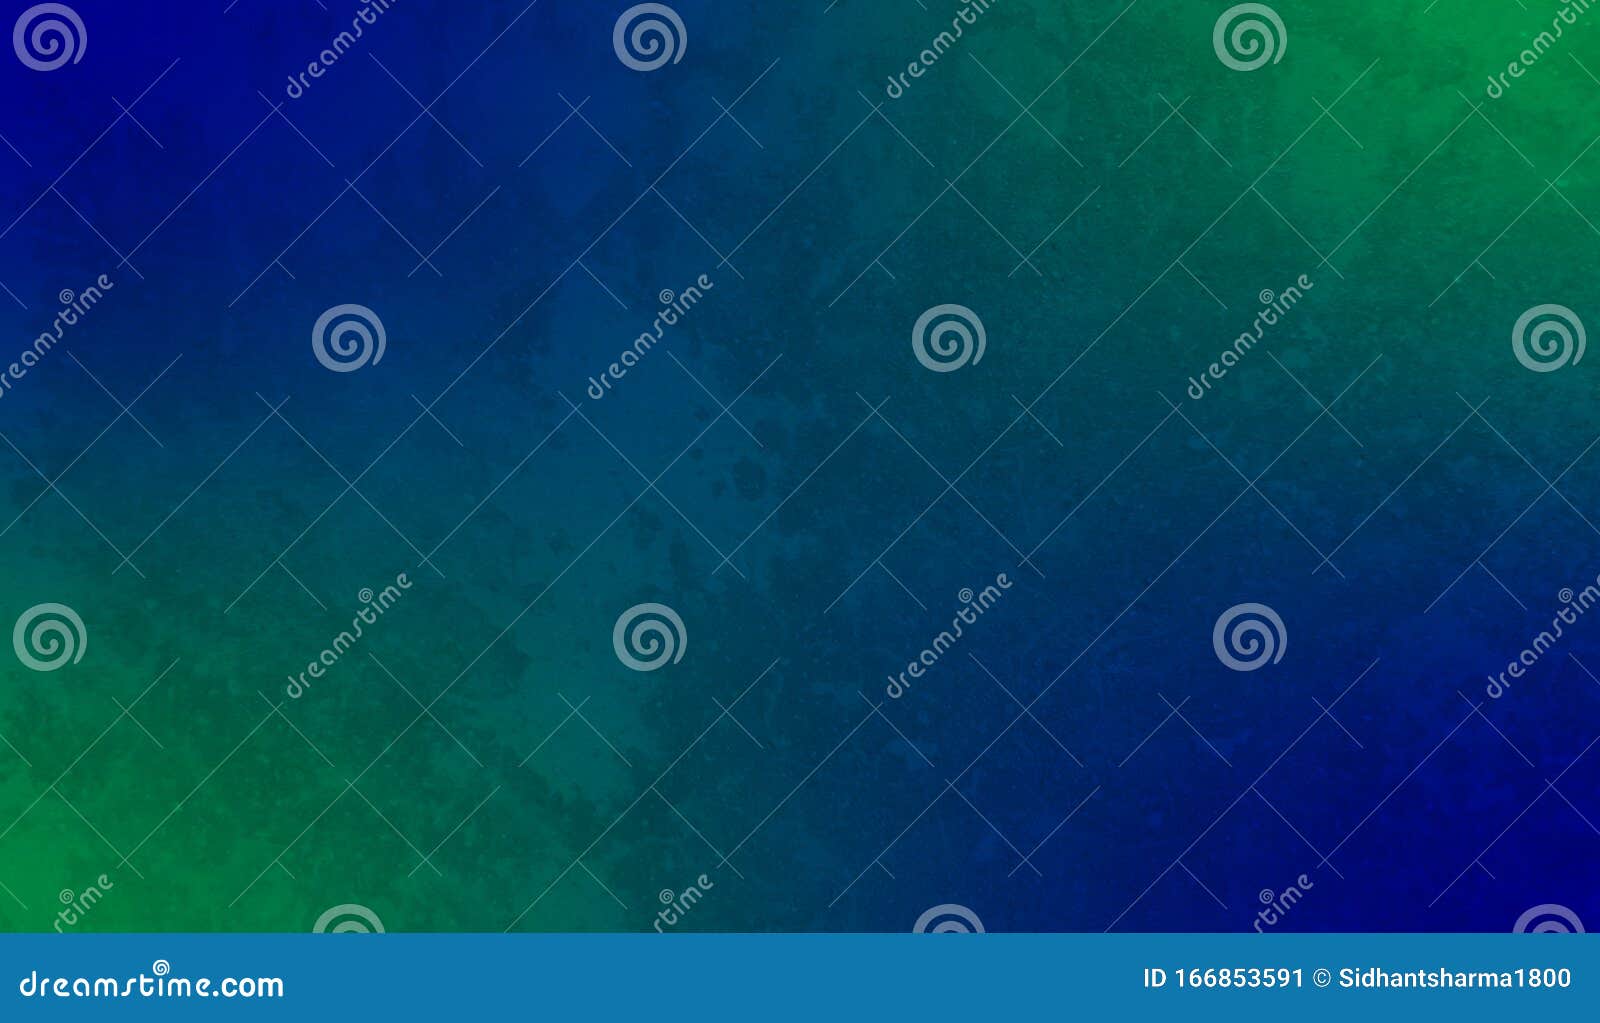 Abstract Deep Navy Blue Moss Green Peacock Shaded Color Texture Background  Marble Pattern Interiors Wall Design. Stock Vector - Illustration of  letter, page: 166853591